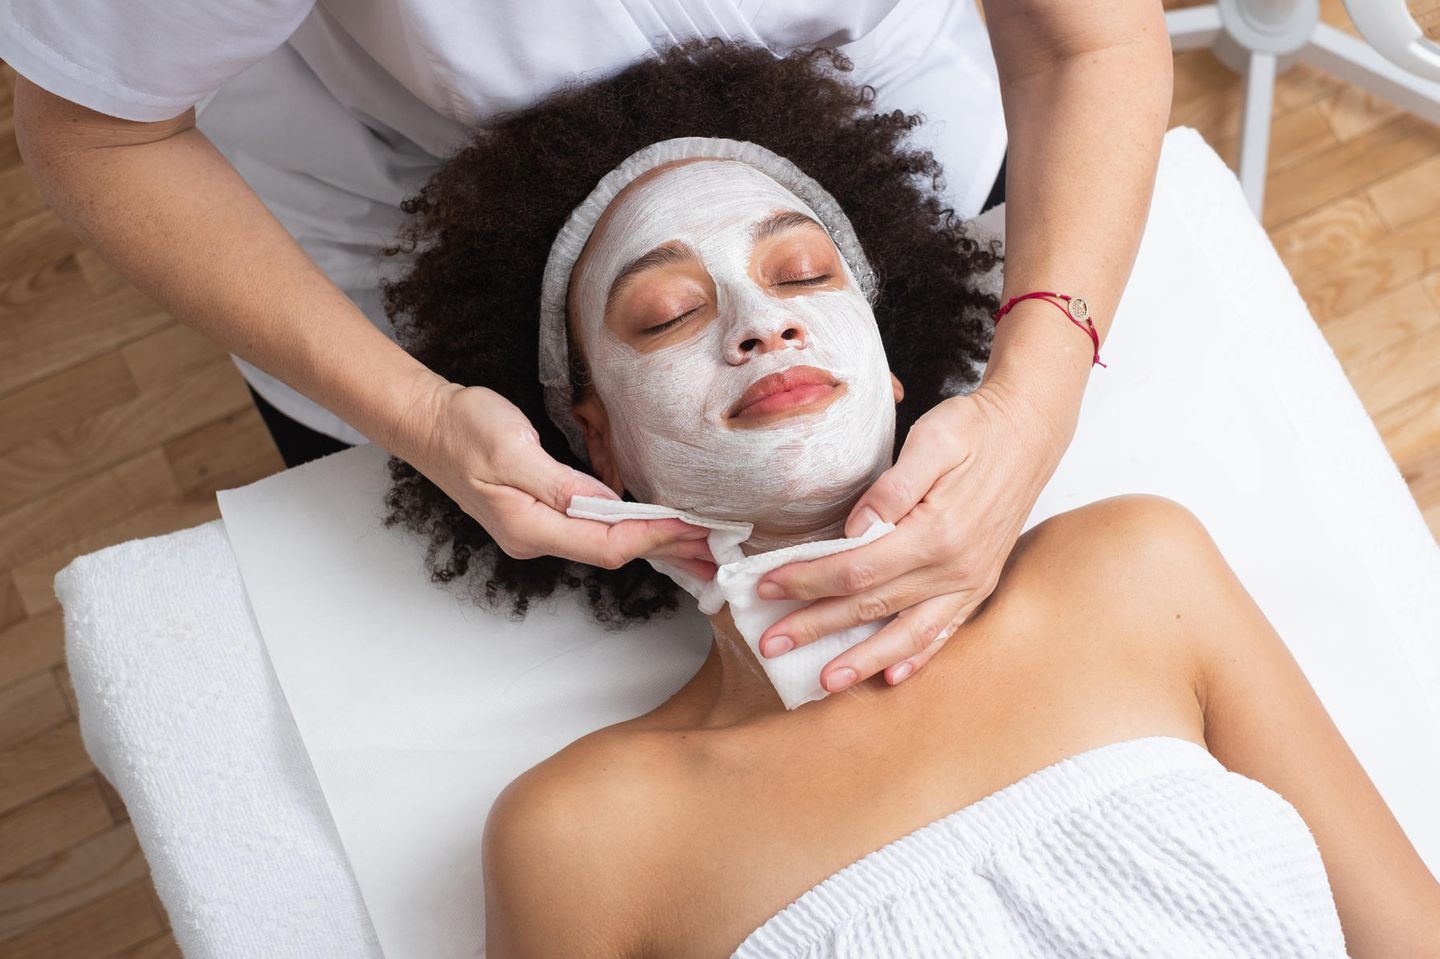 There are beauty treatments that you'd better not try at home.